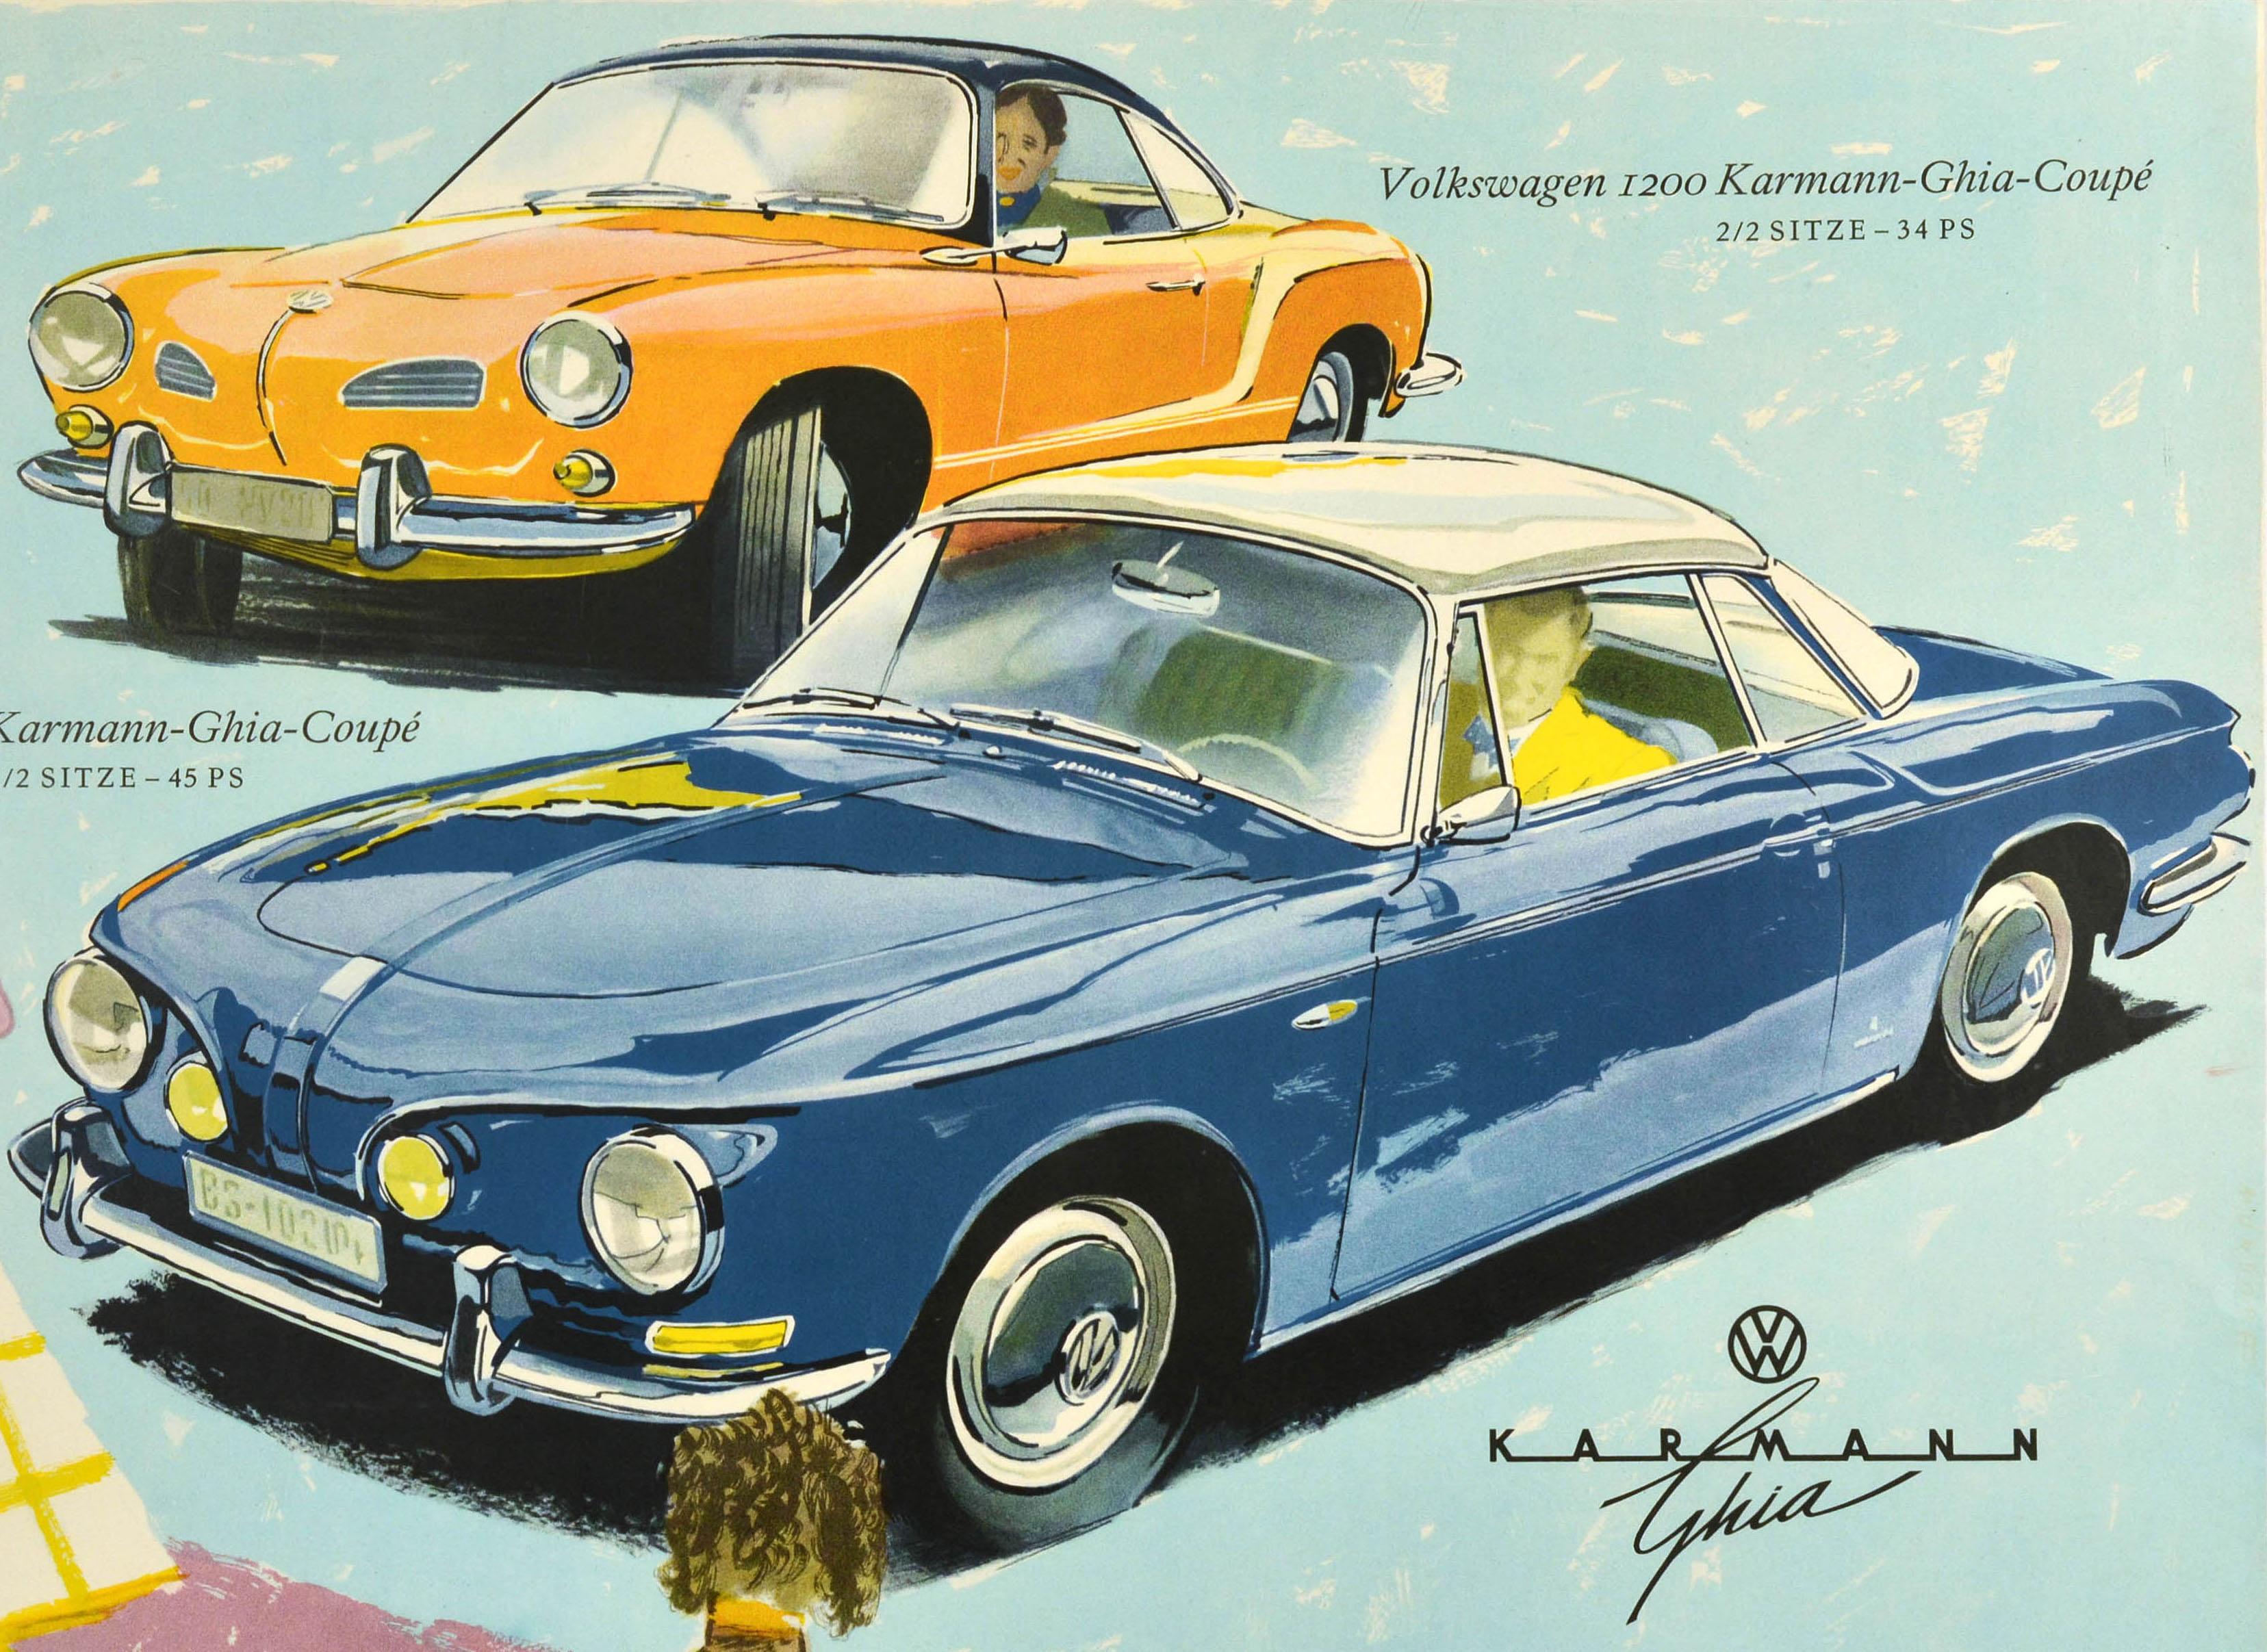 Original vintage VW advertising poster for Volkswagen Karmann Ghia cars featuring an illustration of an elegant lady with a dog looking at smiling drivers in two sporty cars, the VW logo on the side below and description in German next to each